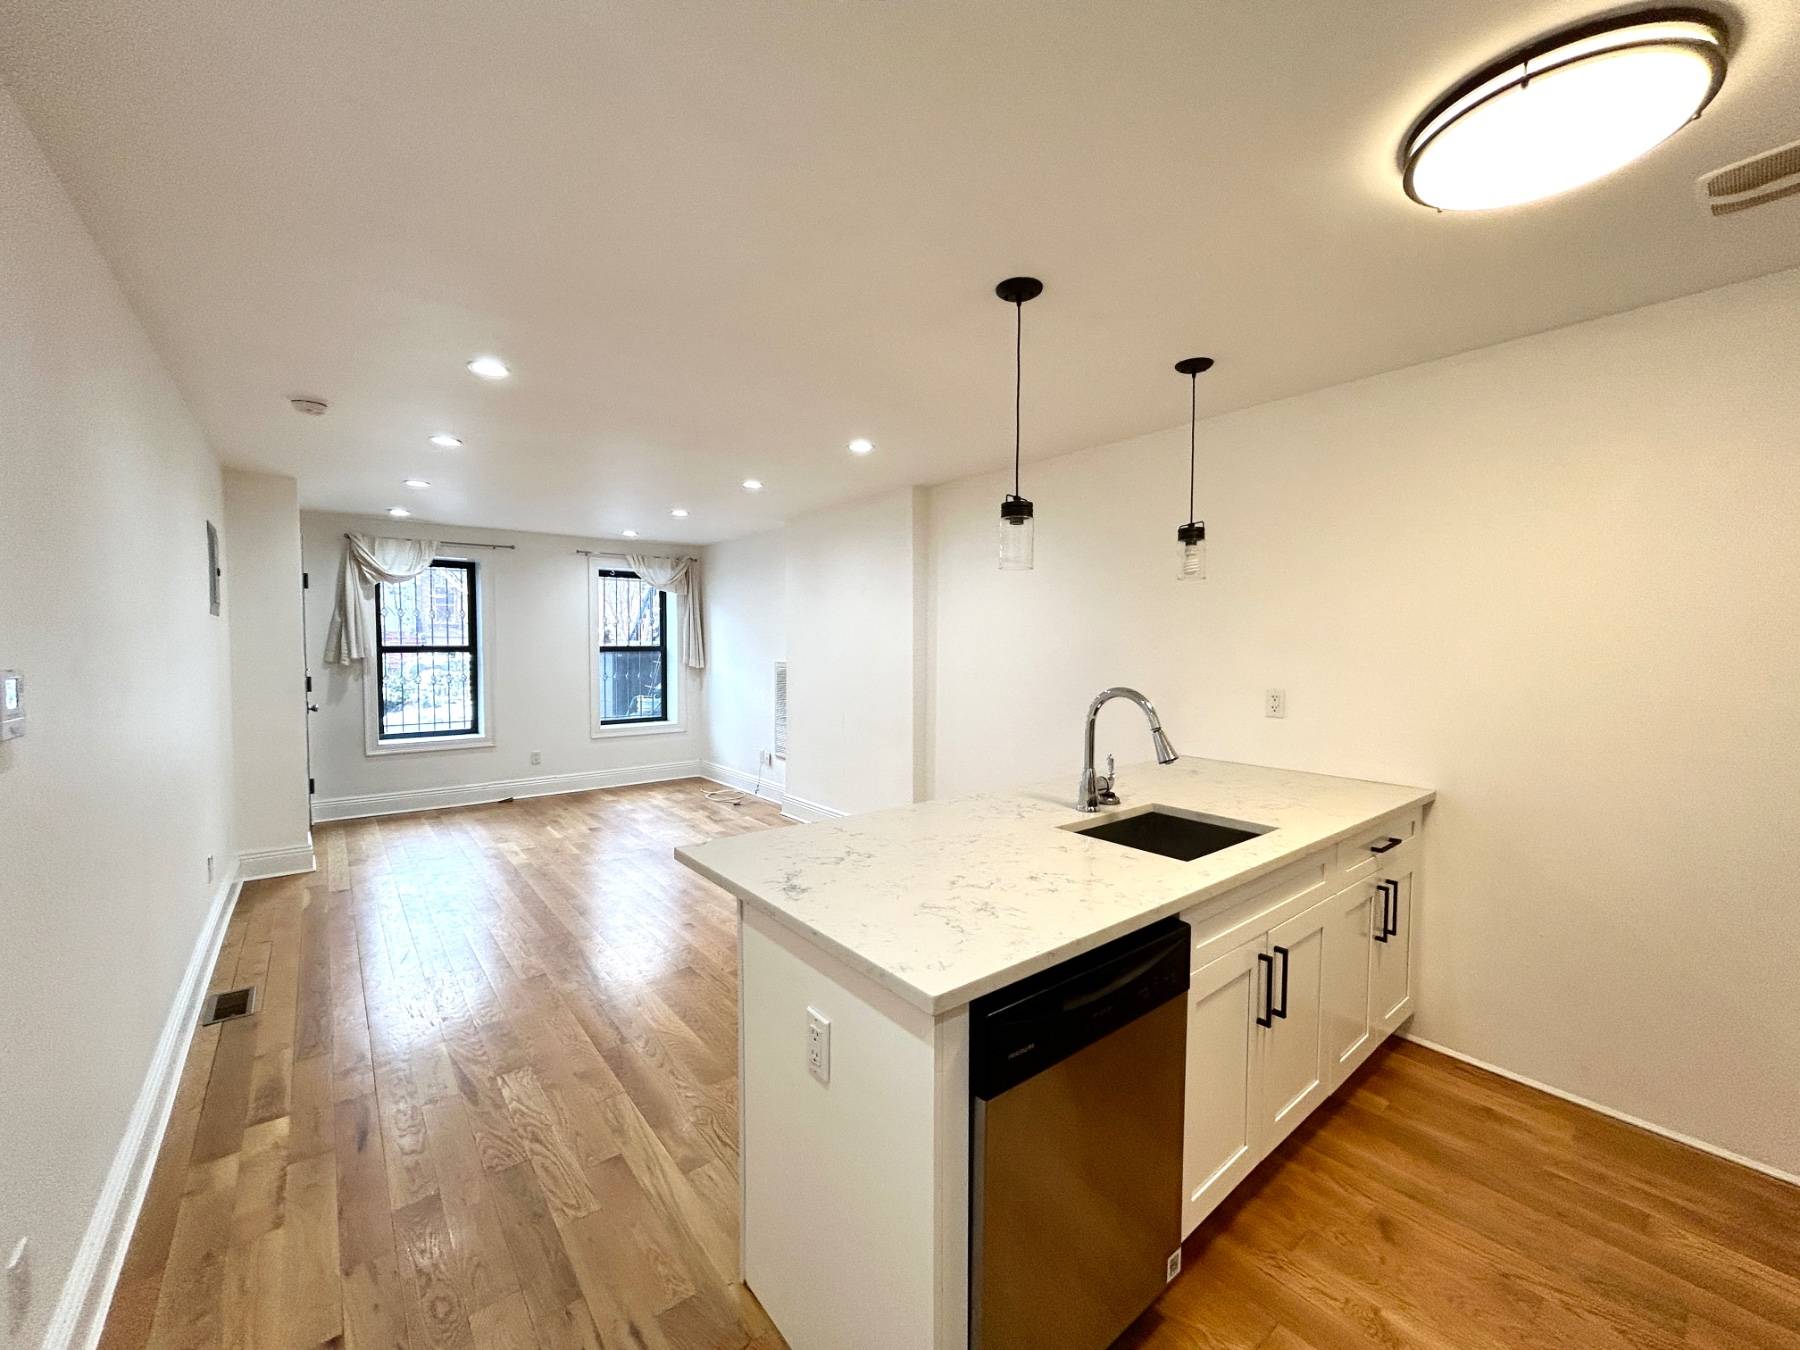 Step into your new haven at 241 Lexington Avenue, where meticulous design meets a revitalized townhouse nestled along a picturesque, tree lined street in Bedford Stuyvesant.